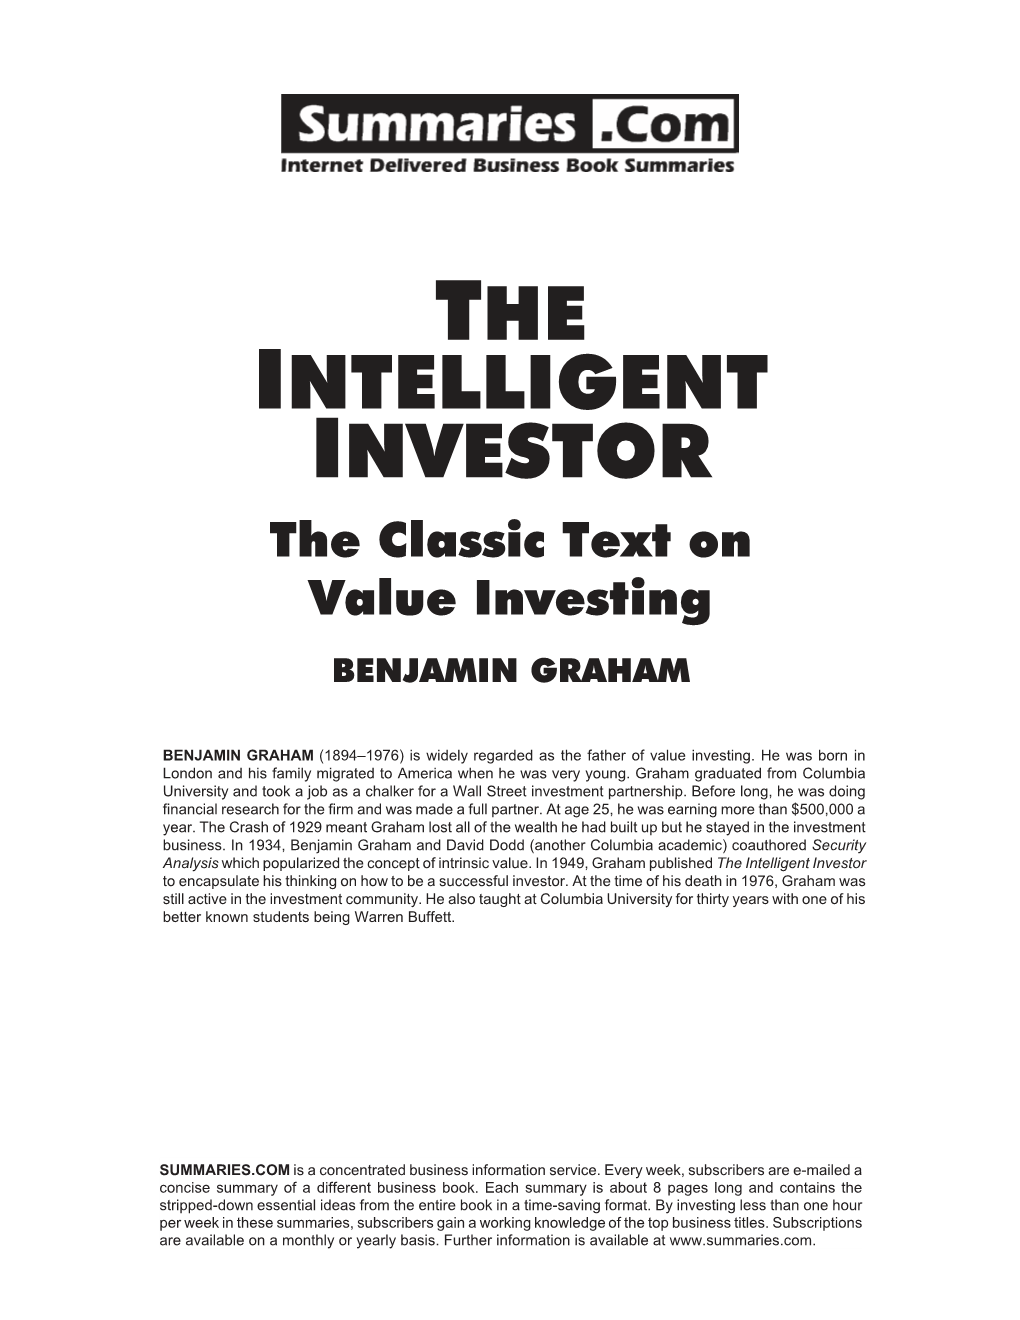 THE INTELLIGENT INVESTOR the Classic Text on Value Investing BENJAMIN GRAHAM